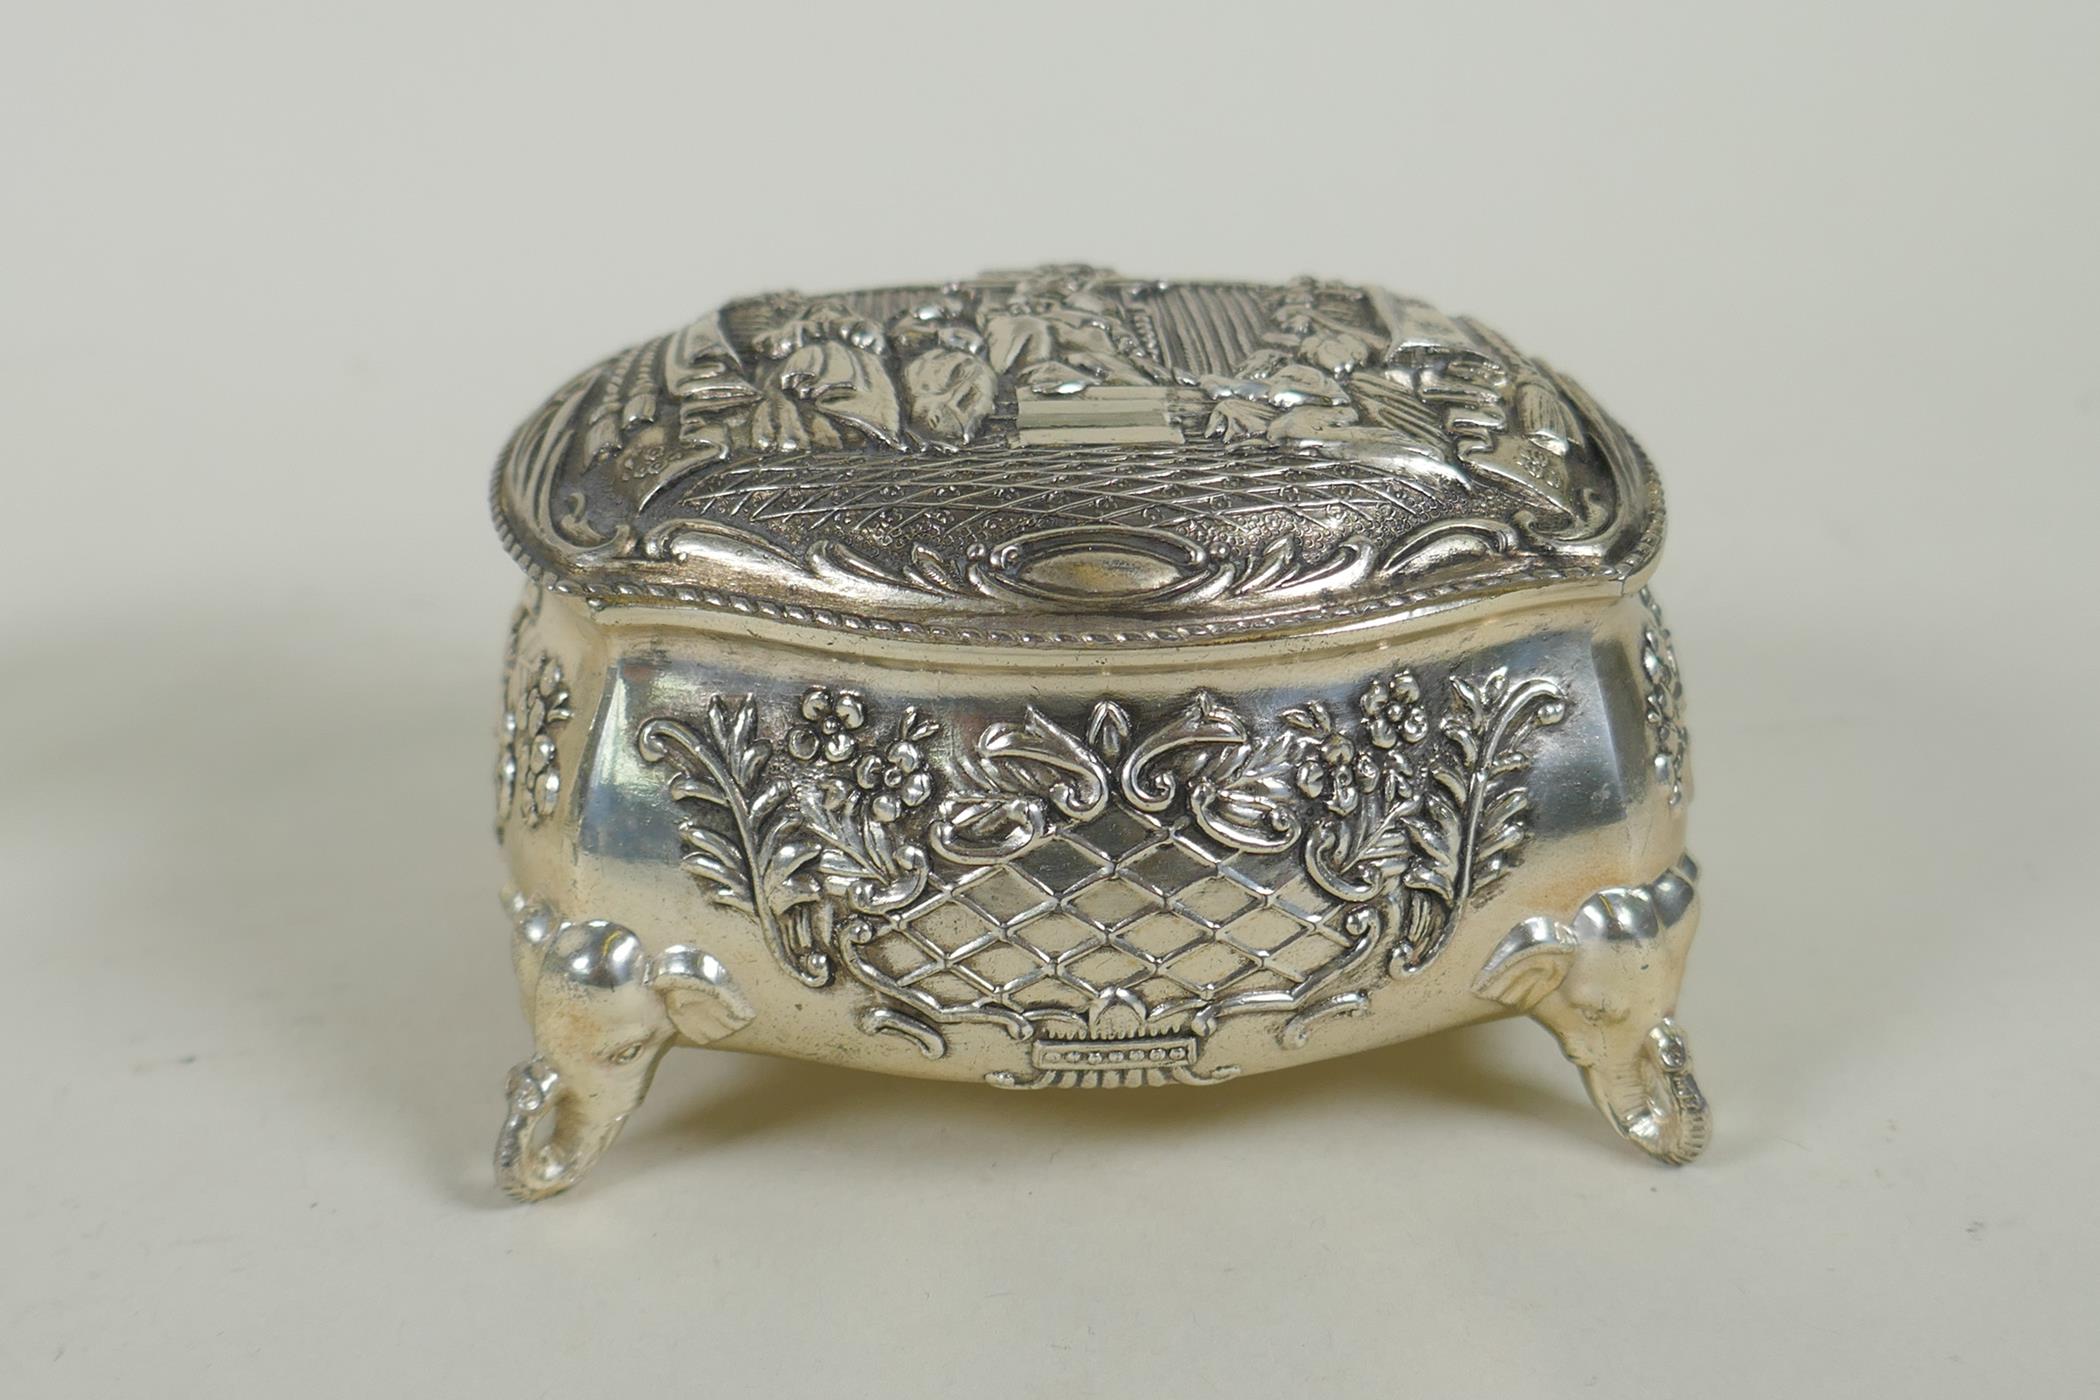 A pair of Mappin & Webb silver plated salts, a silver plated bombe shaped jewellery casket and a - Image 7 of 9